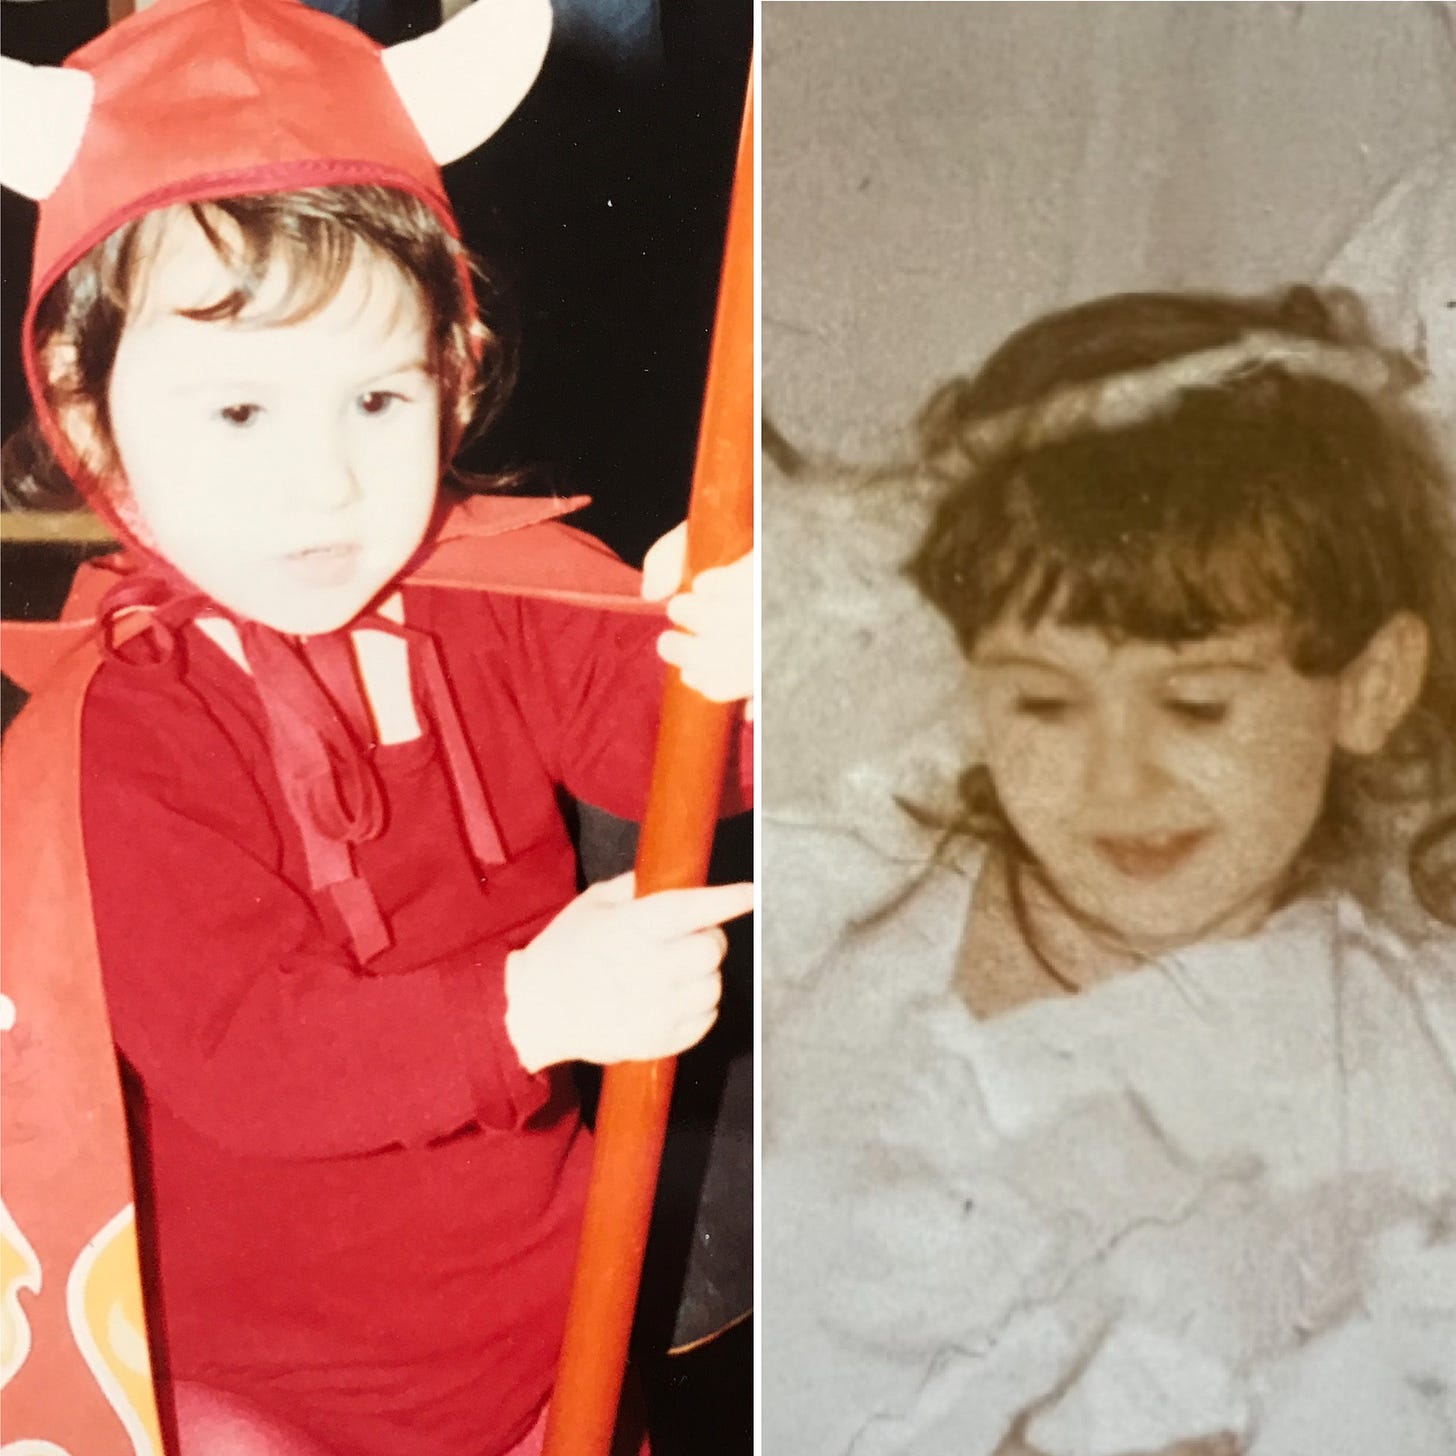 Two Halloween costumes from Lyric’s childhood, on the left is the little red devil costume, and on the right is the angel costume, made with duck feathers. 